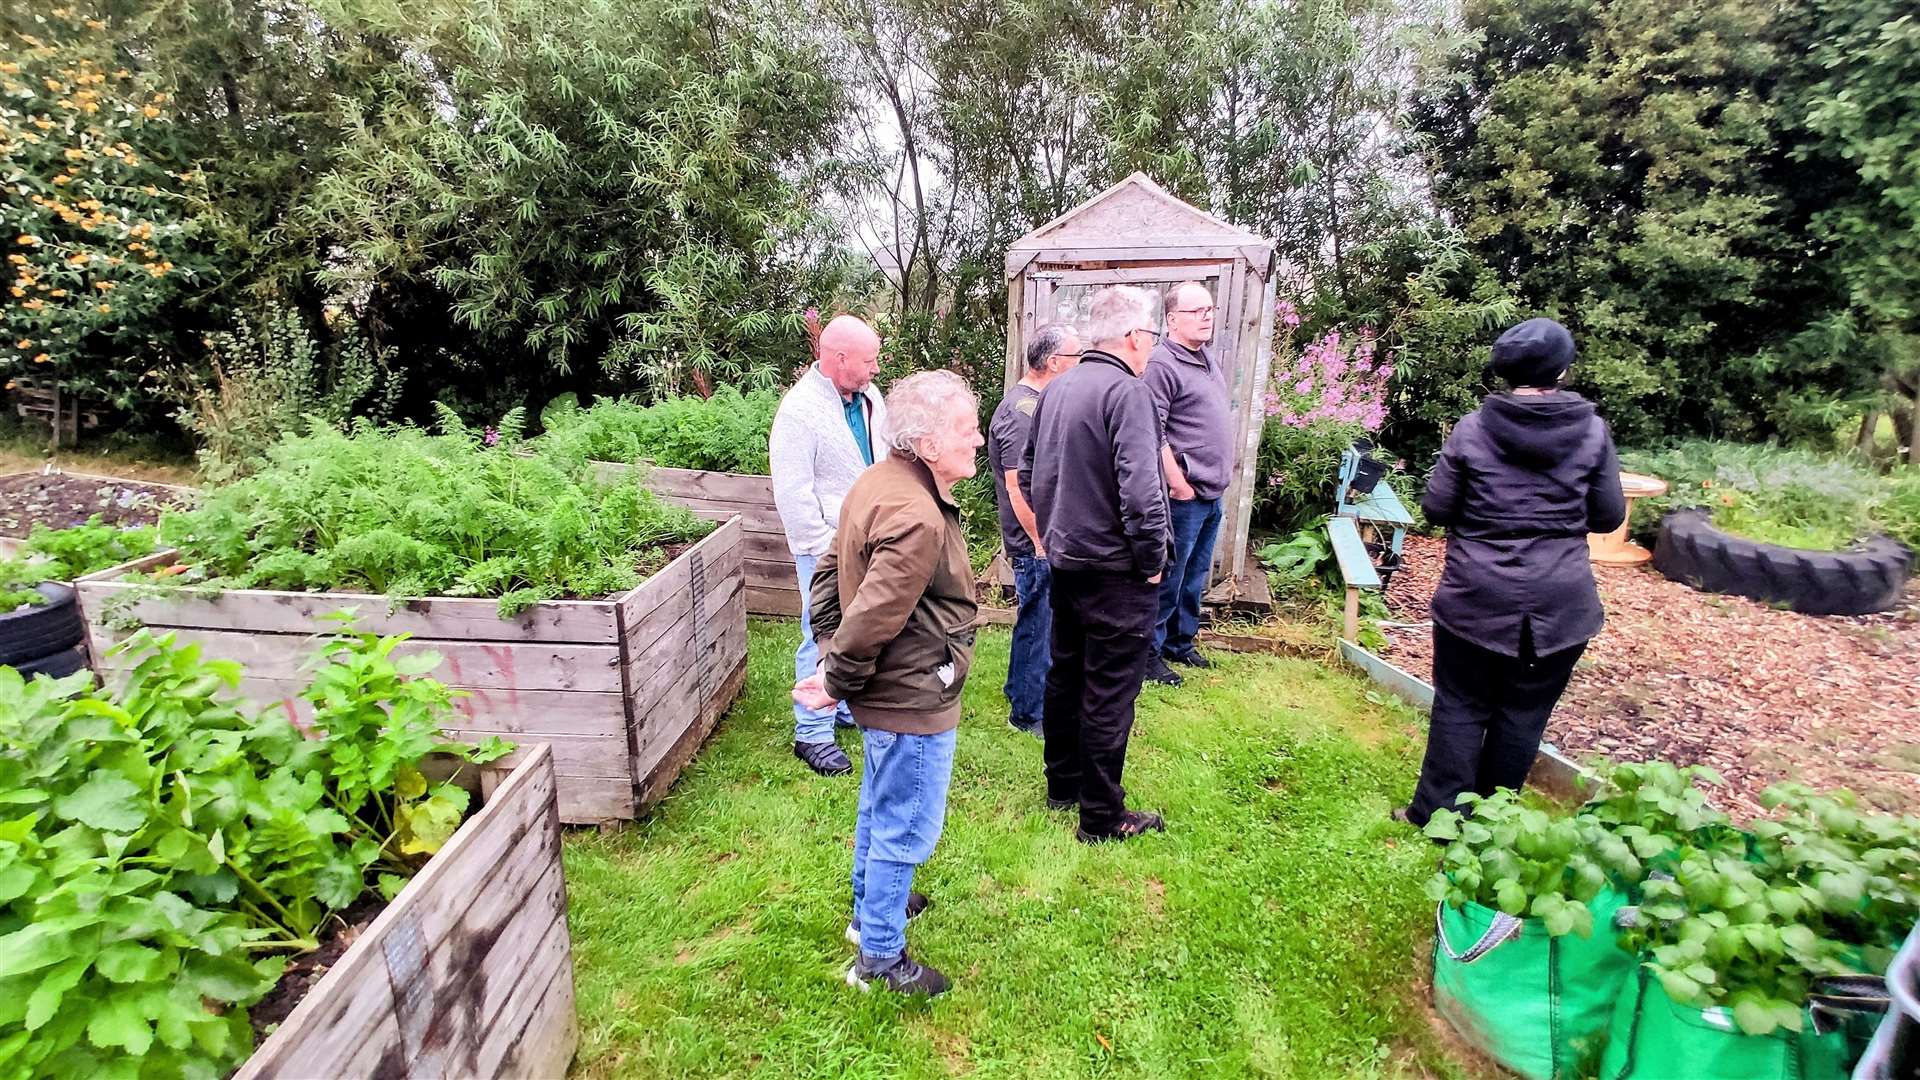 Sharon Dismore from the Thurso Community Development Trust talks with men from the JiM group at the garden project in Thurso.